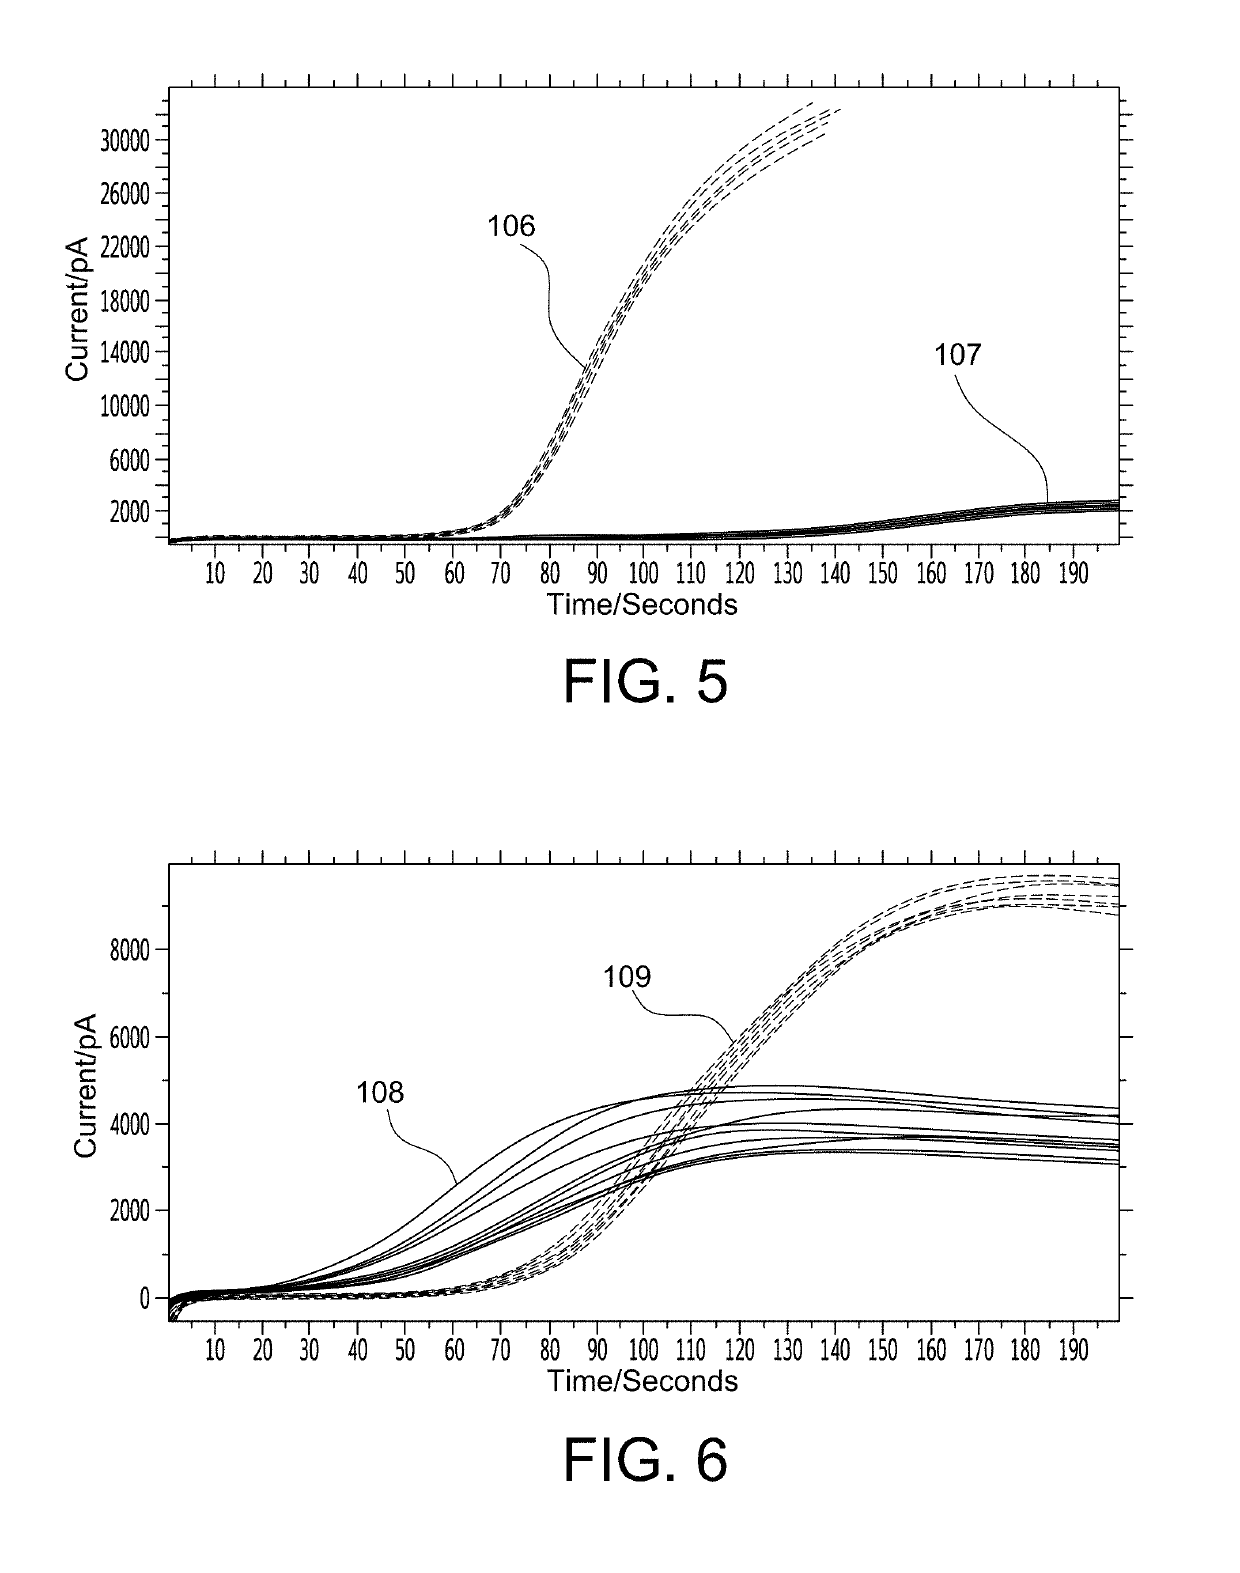 Microfabricated device with micro-environment sensors for assaying coagulation in fluid samples